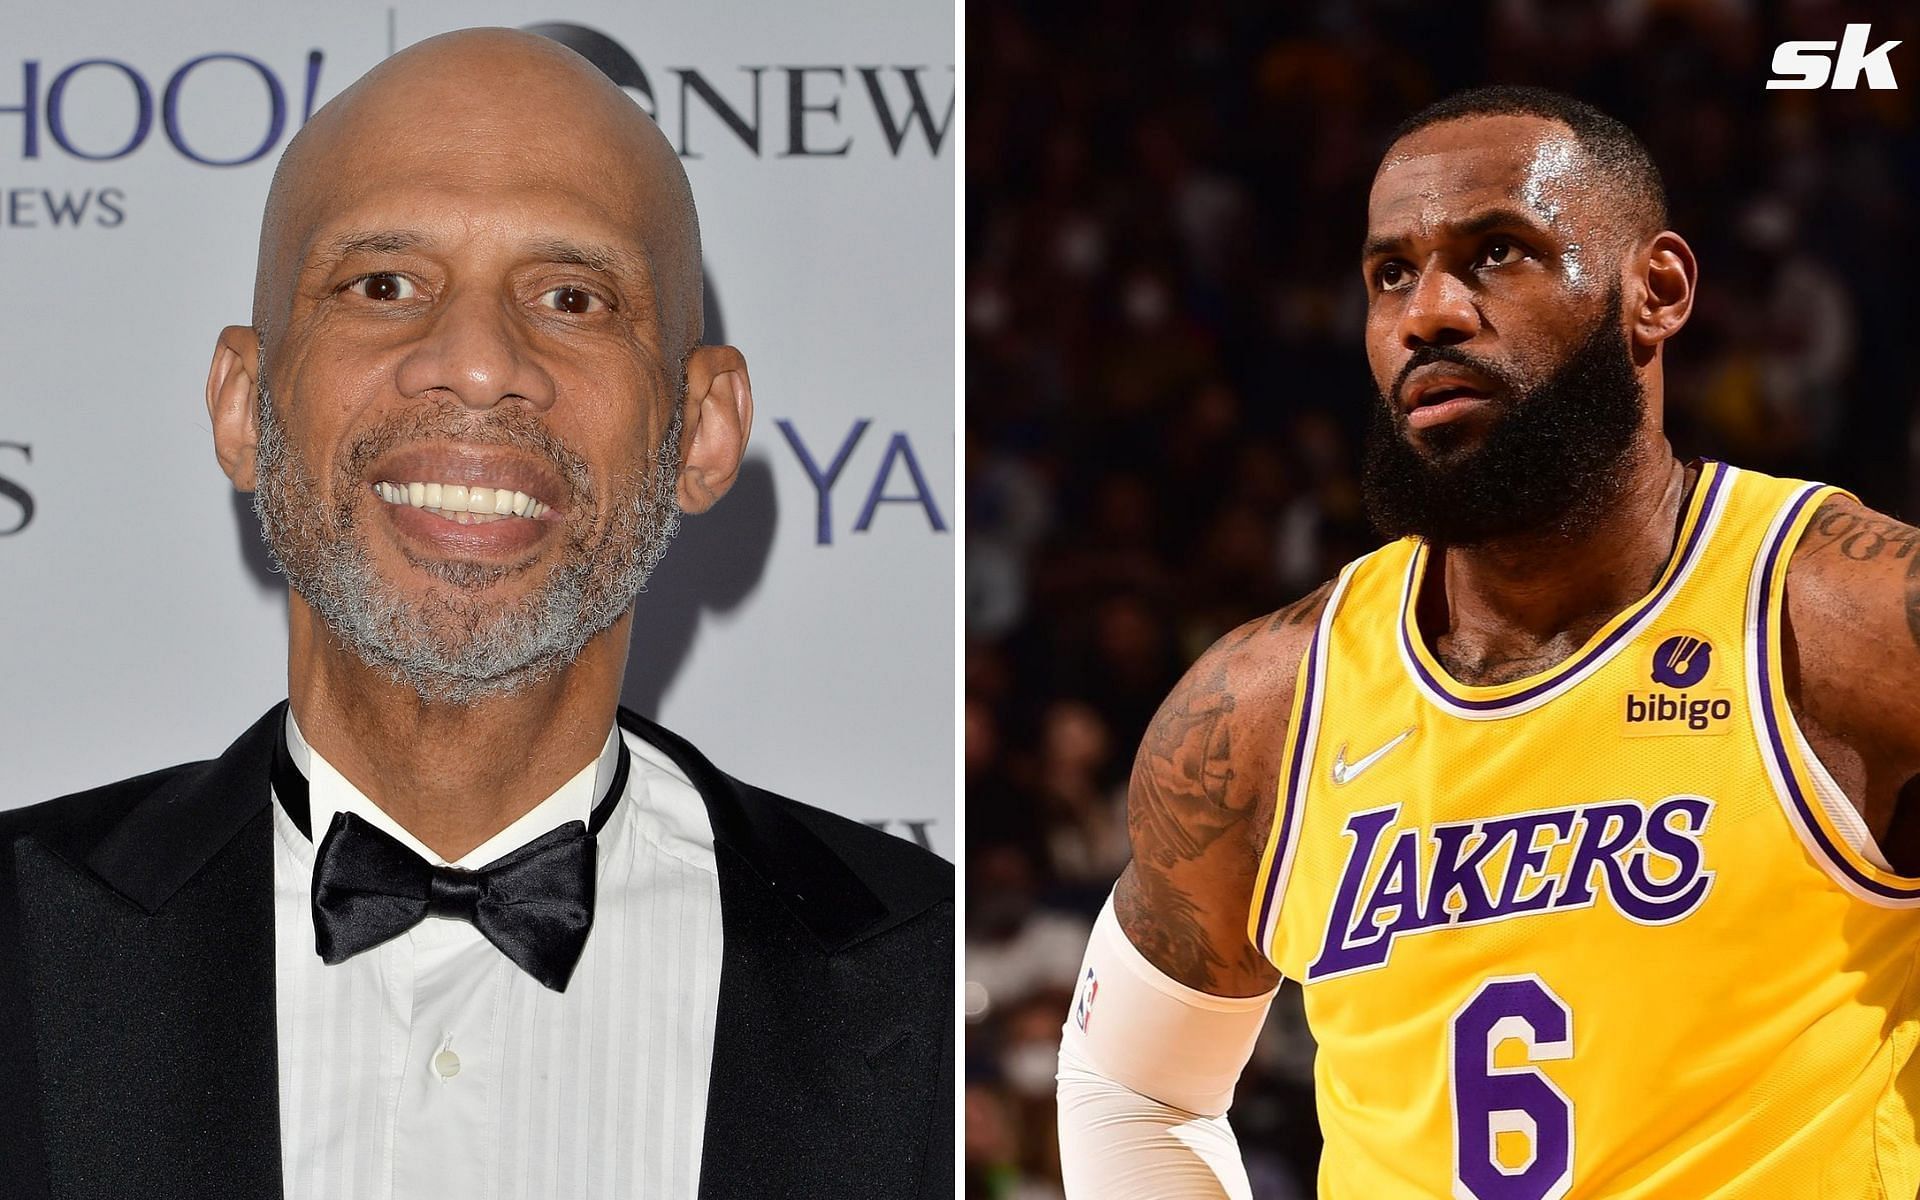 Kareem Abdul-Jabbar college stats: How many more NBA points could